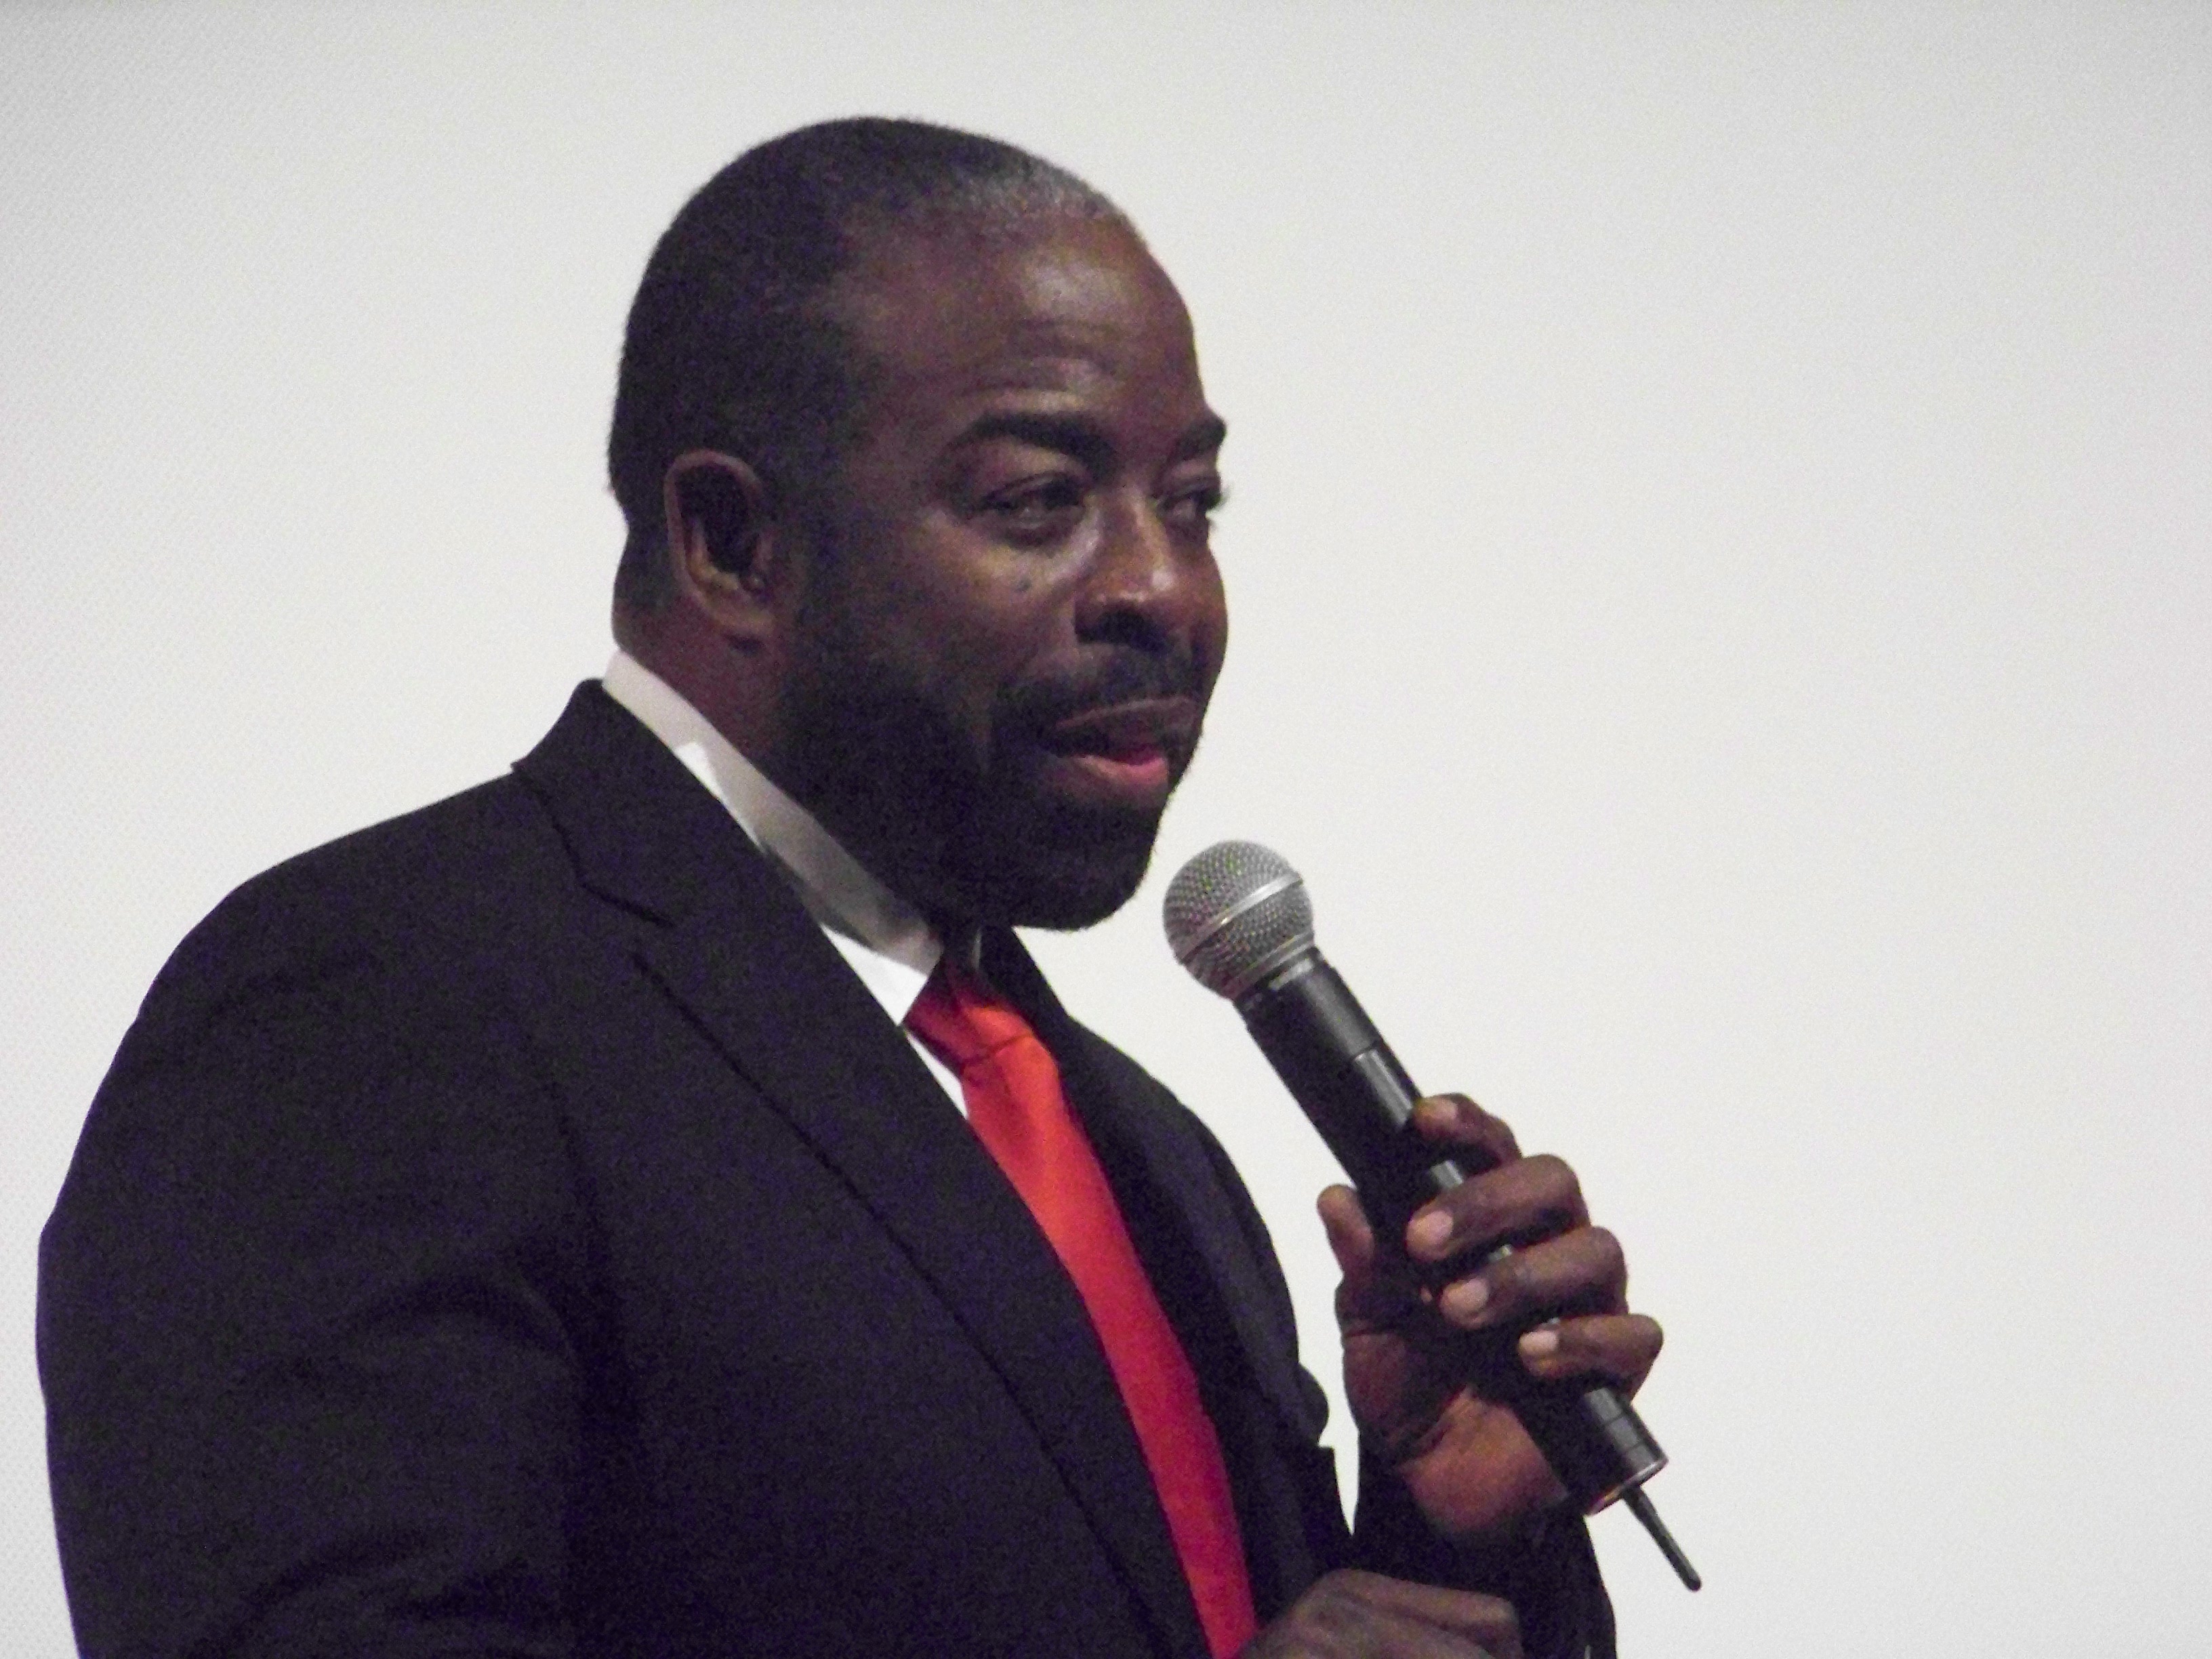 Lecture by Les Brown